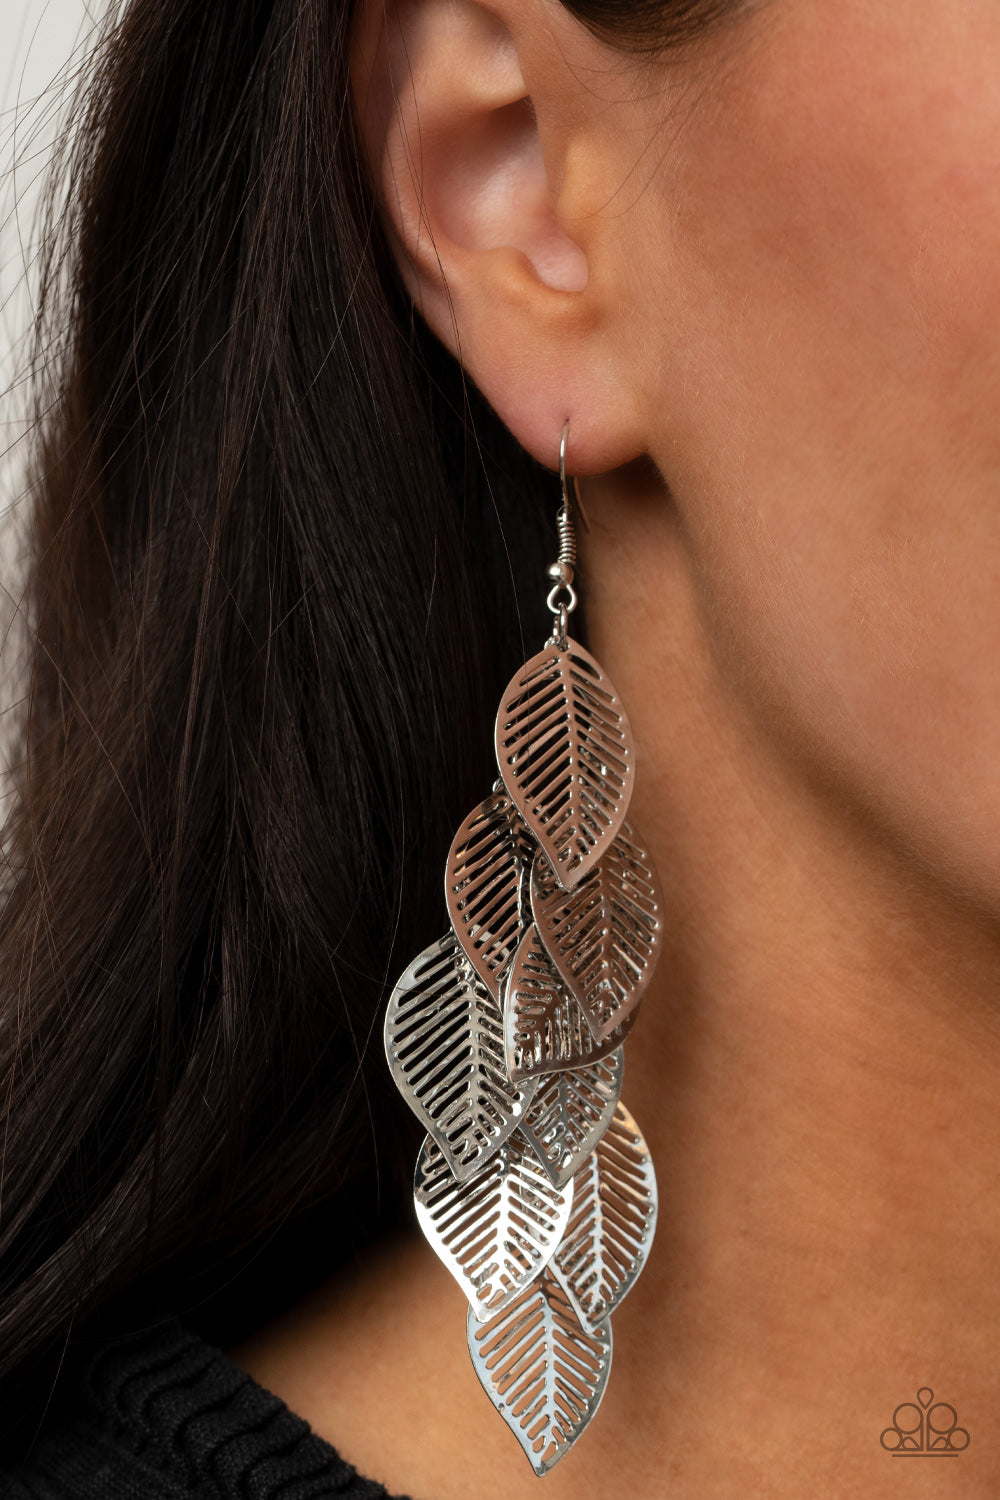 Paparazzi Accessories - Limitlessly Leafy #E429 - Silver Earrings